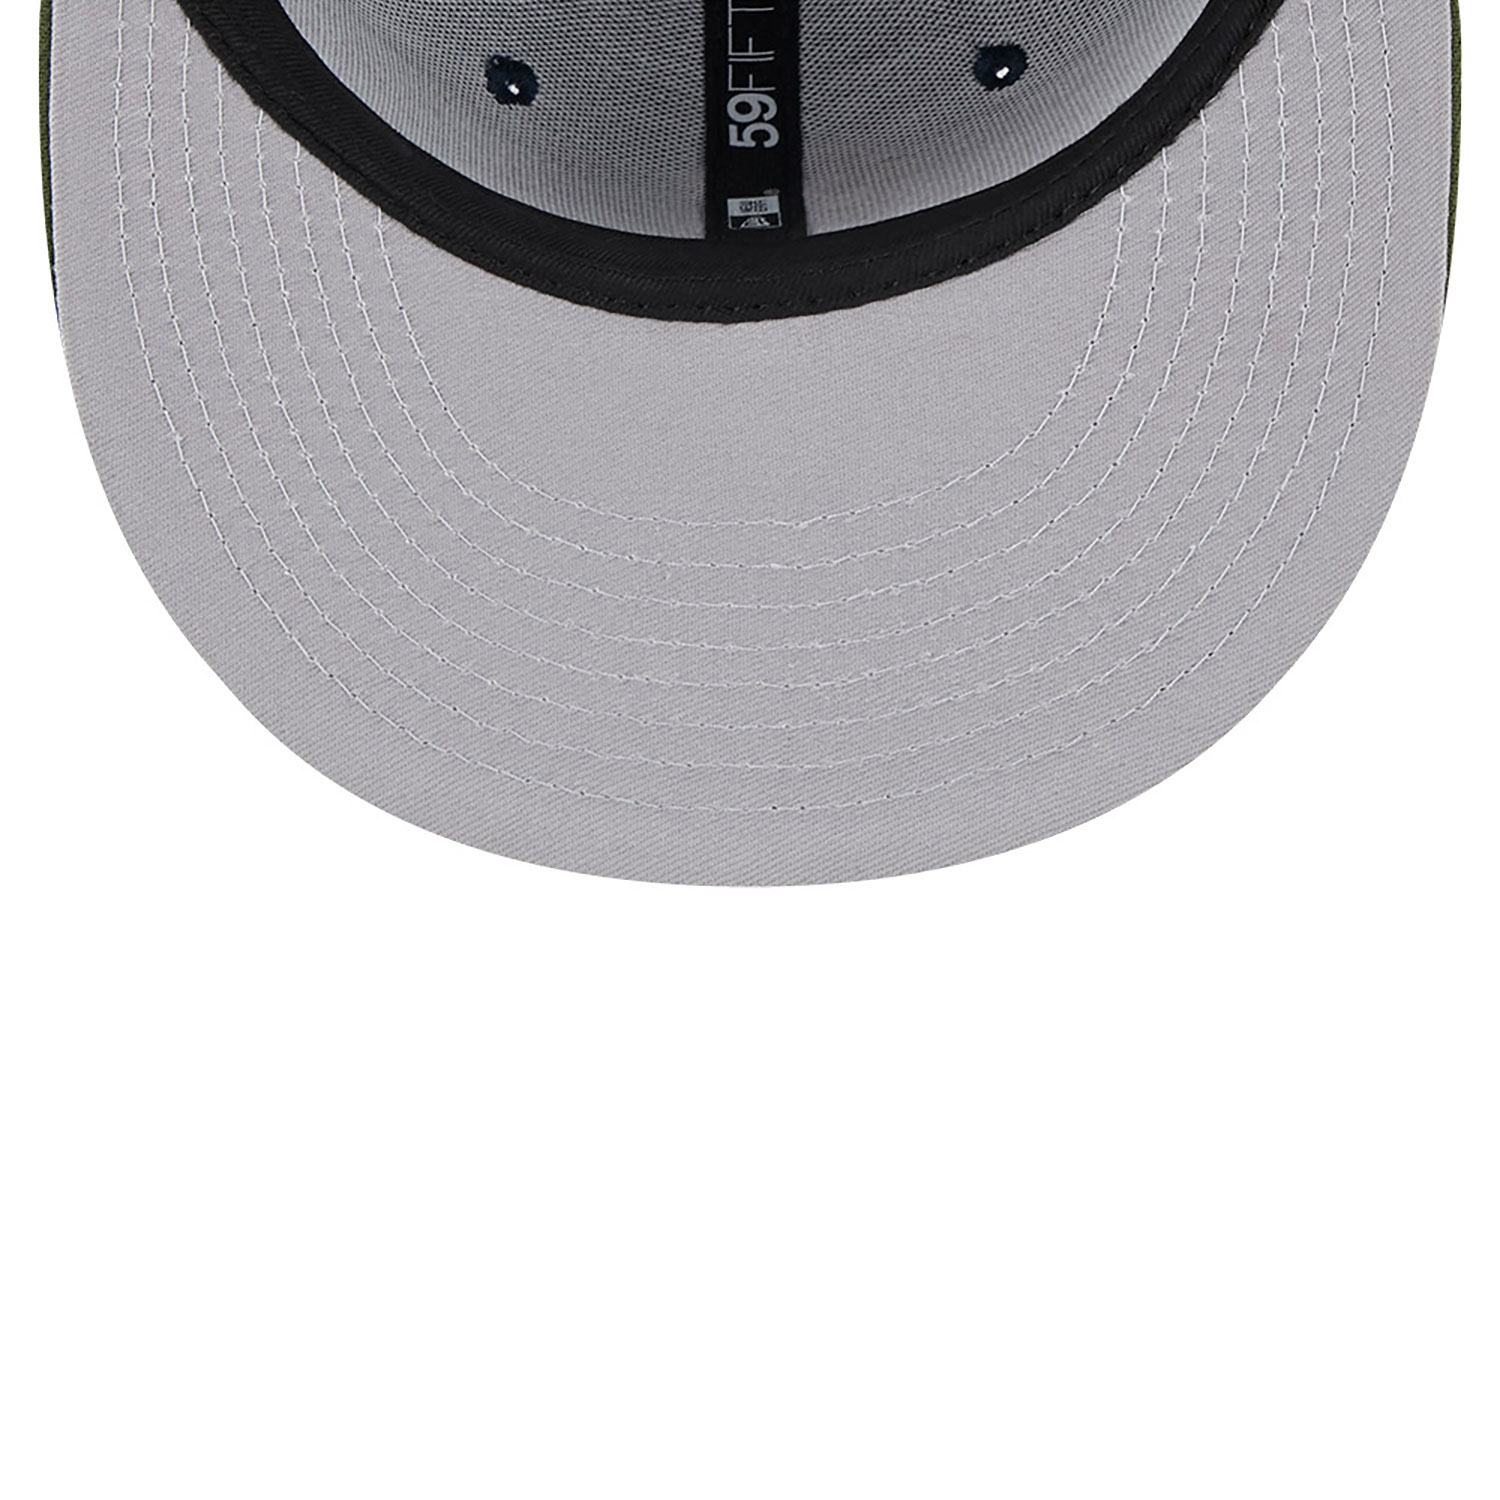 Casquette 59FIFTY Fitted Chicago White Sox Sprouted